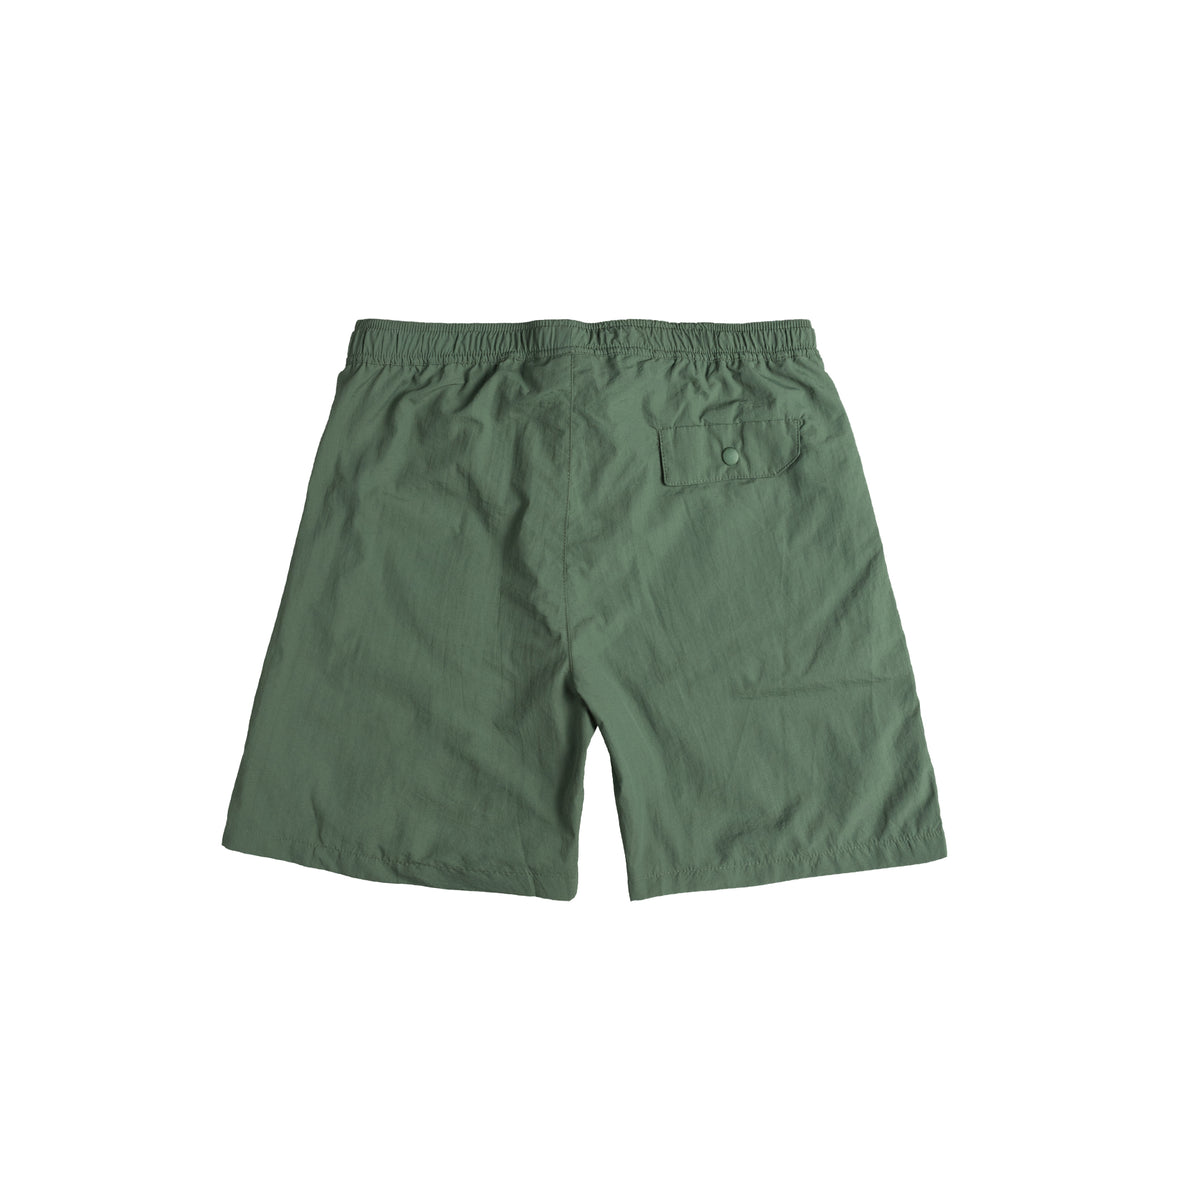 Butter Goods Equipment Shorts – buy now at Asphaltgold Online Store!